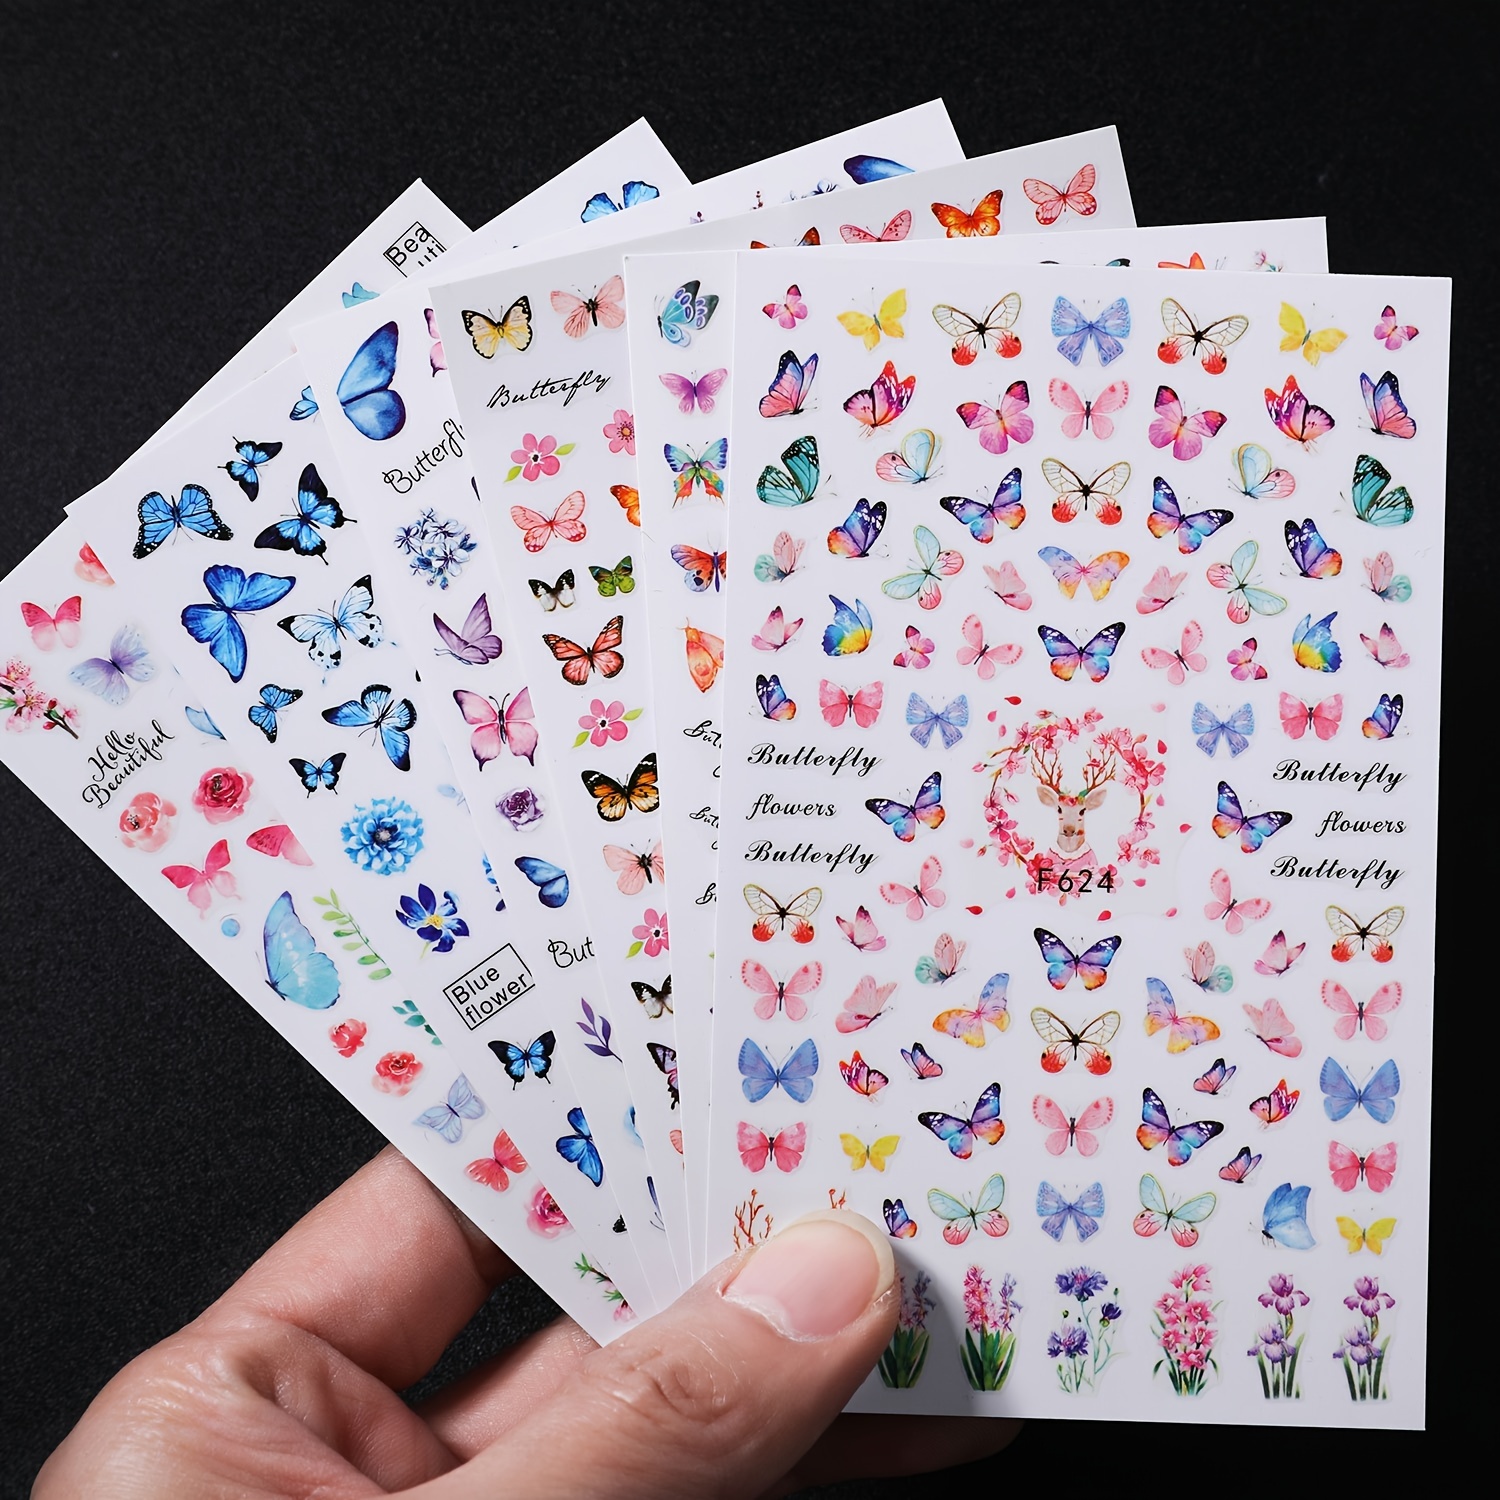 

6 Sheet Spring Butterfly Flower Design Nail Art Stickers, Self Adhesive Nail Art Decals For Nail Art Decoration,nail Art Supplies For Women And Girls